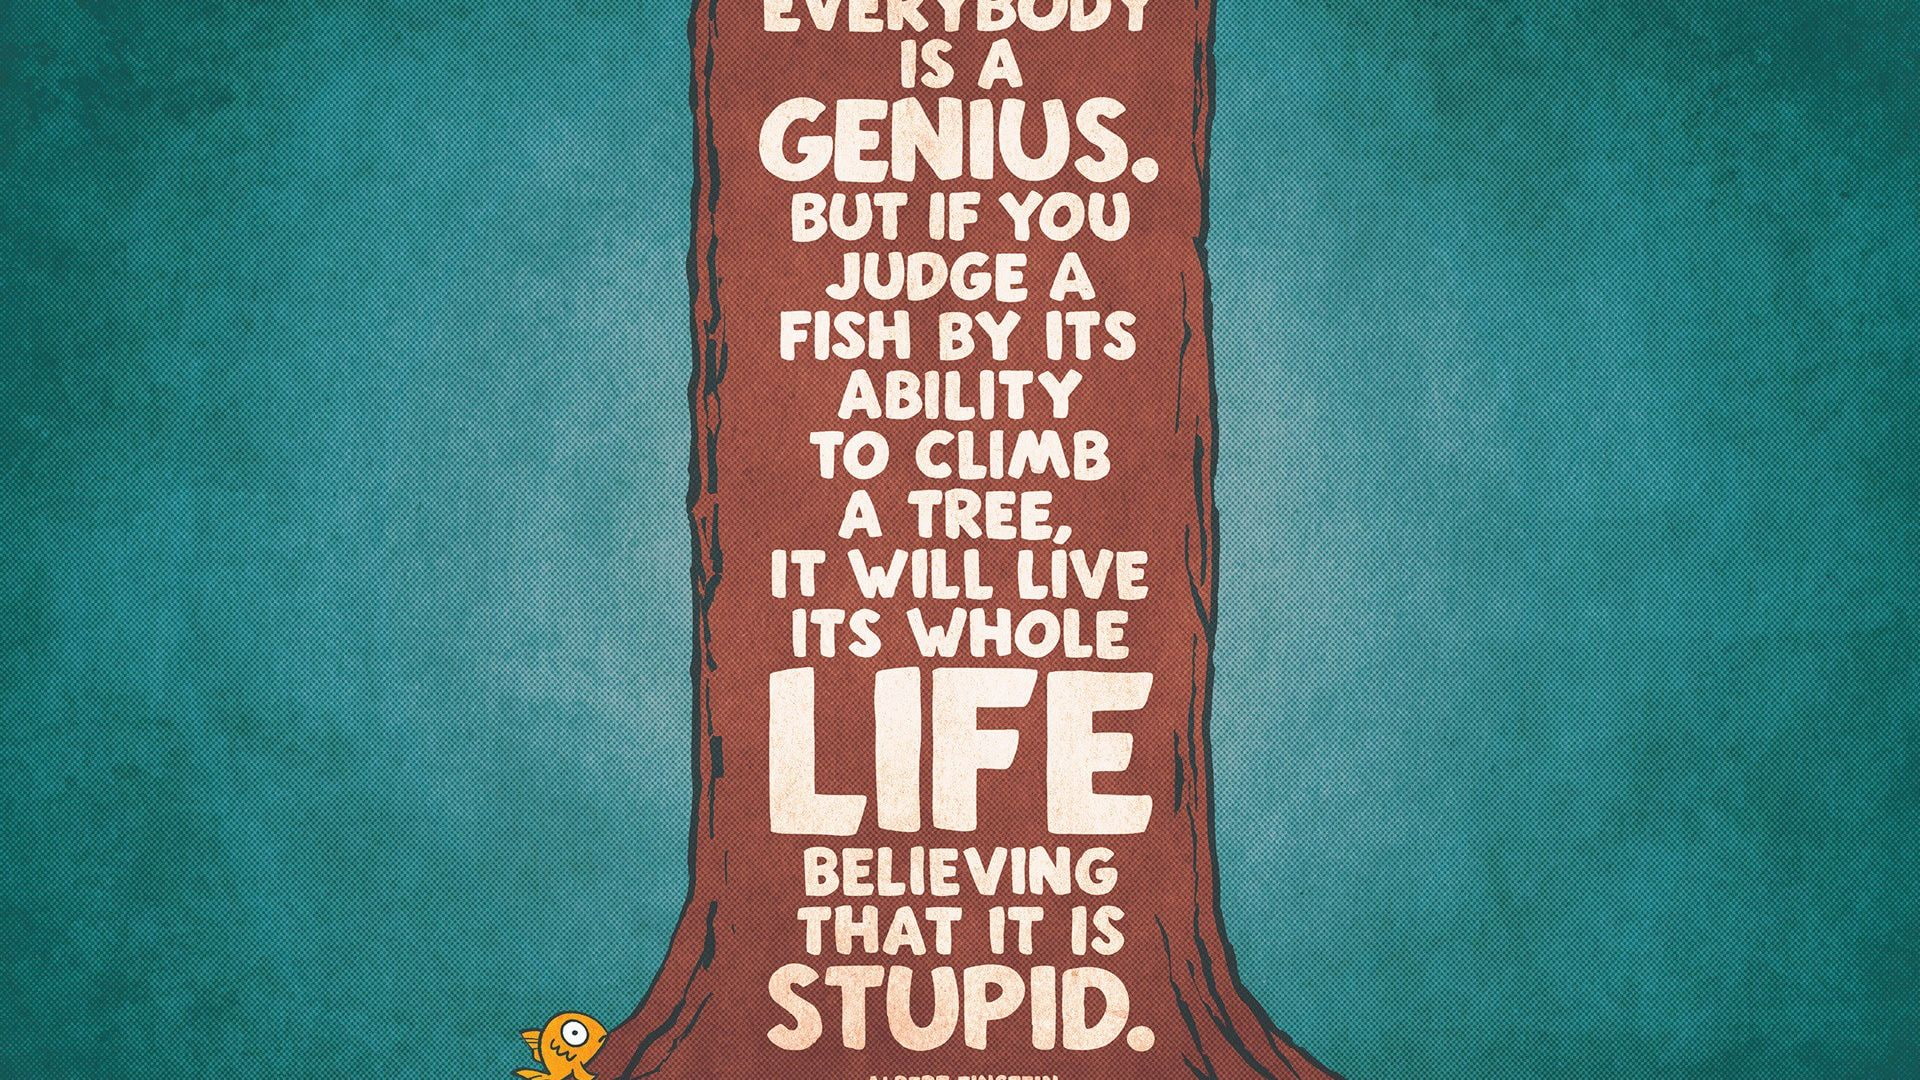 Albert Einstein Motivational Quote HD, genius but if you judge a fish by its ability to climb a tree text